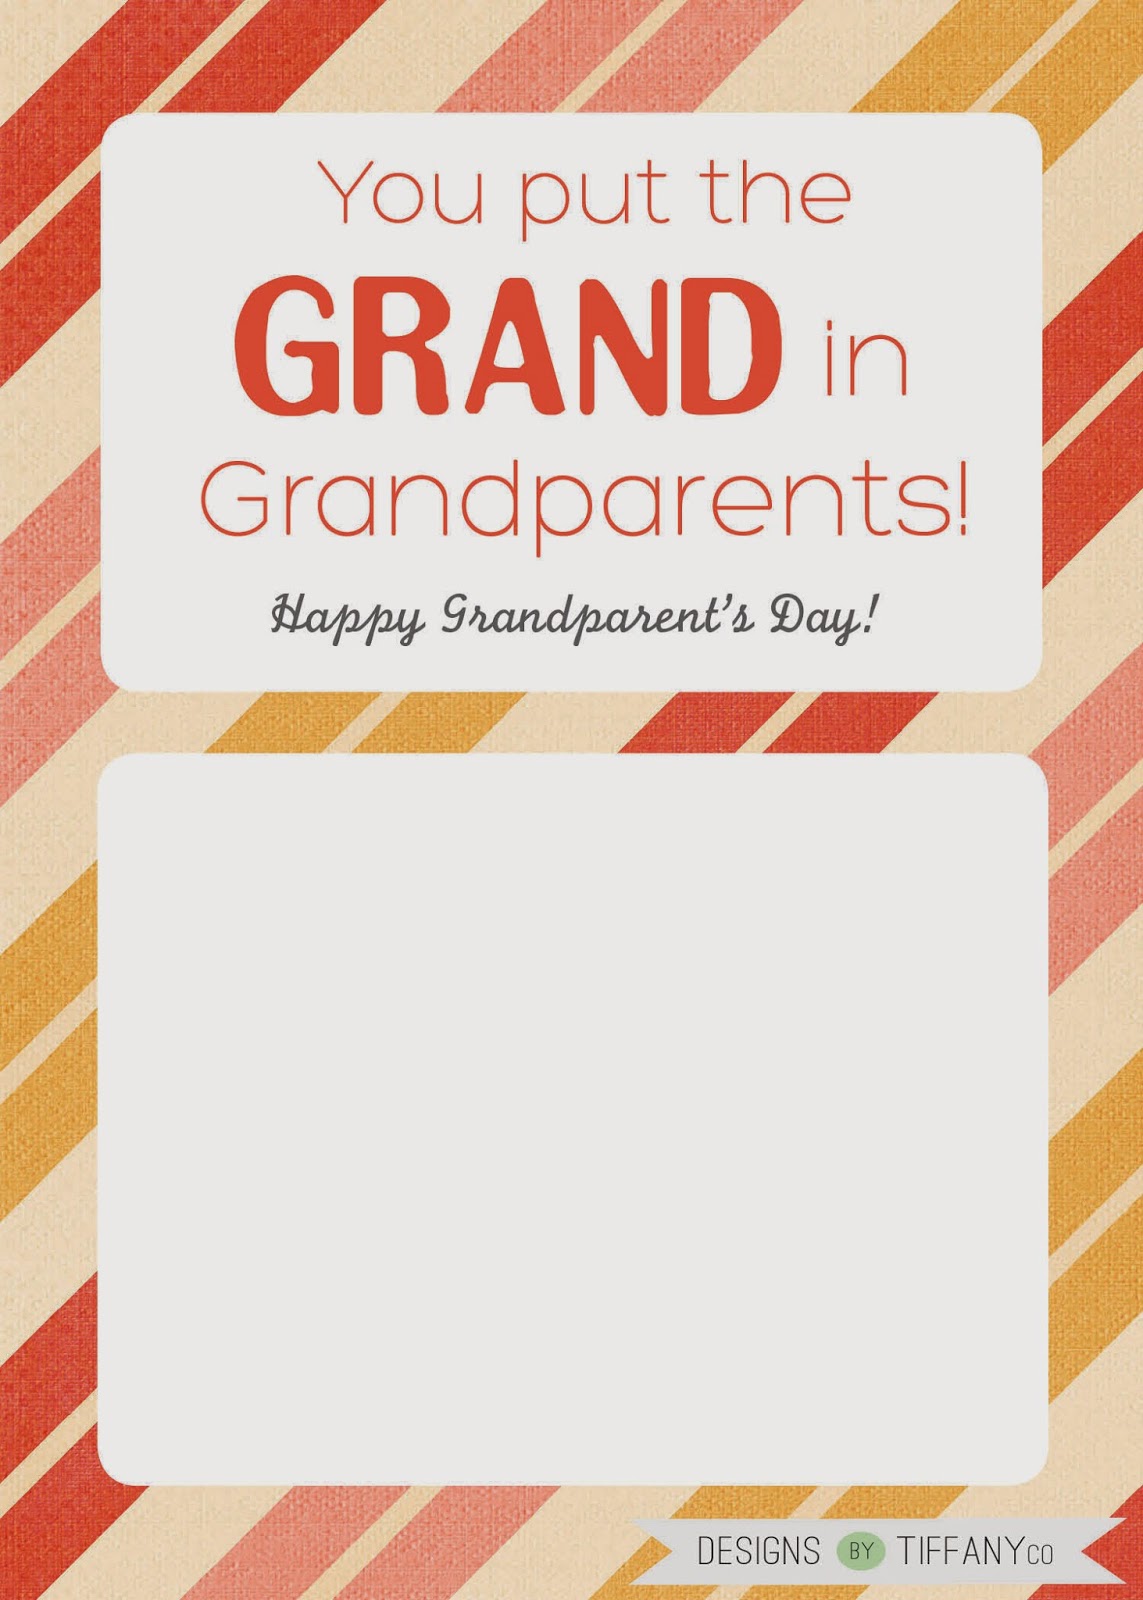 grandparent-s-day-card-free-printable-designs-by-tiffanyco